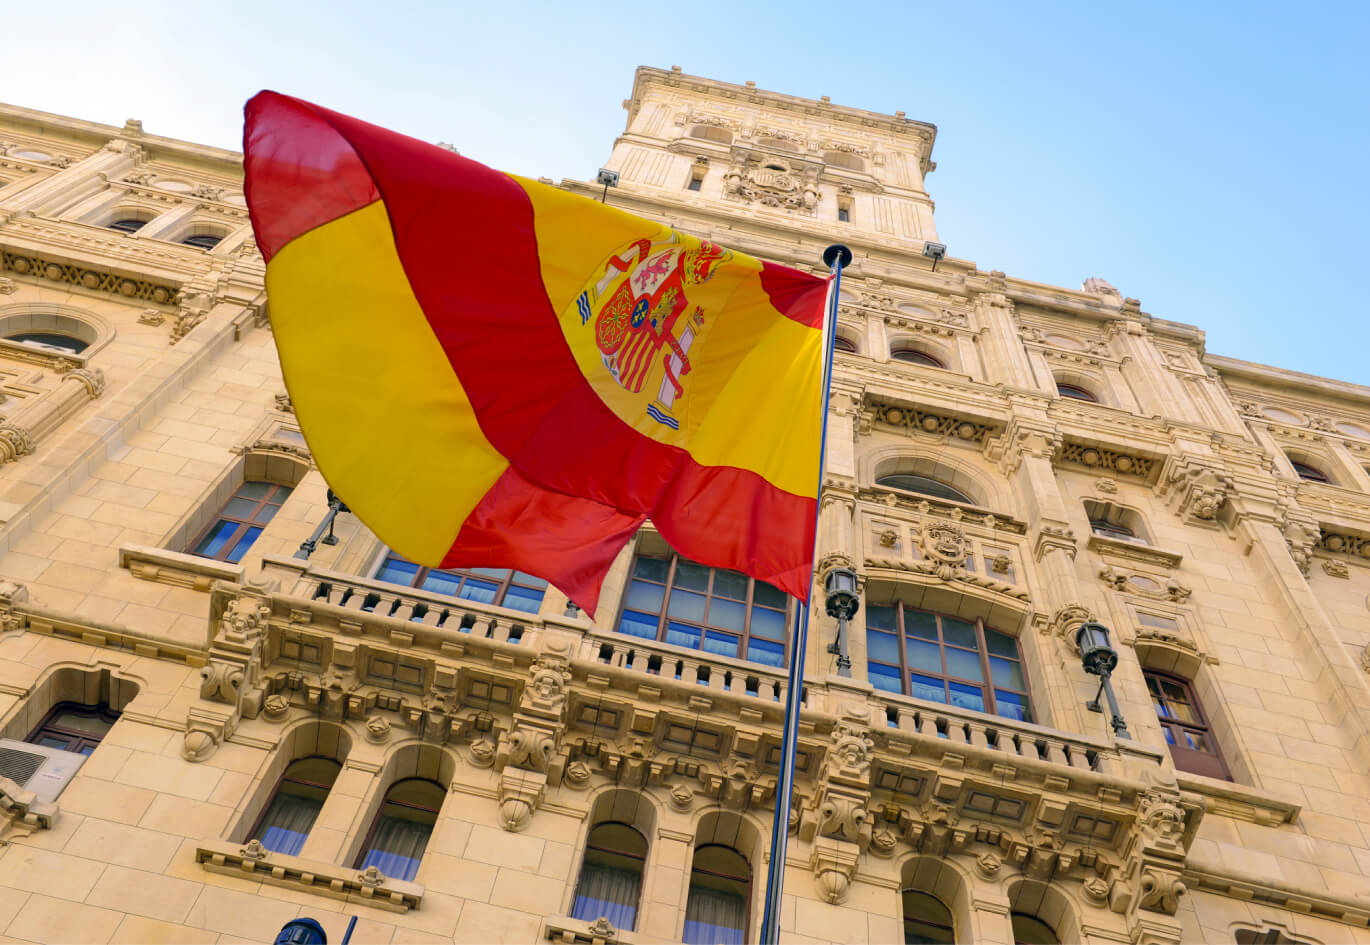 Living the Spanish Dream: The Benefits and Challenges of Gaining Residency Through Investment